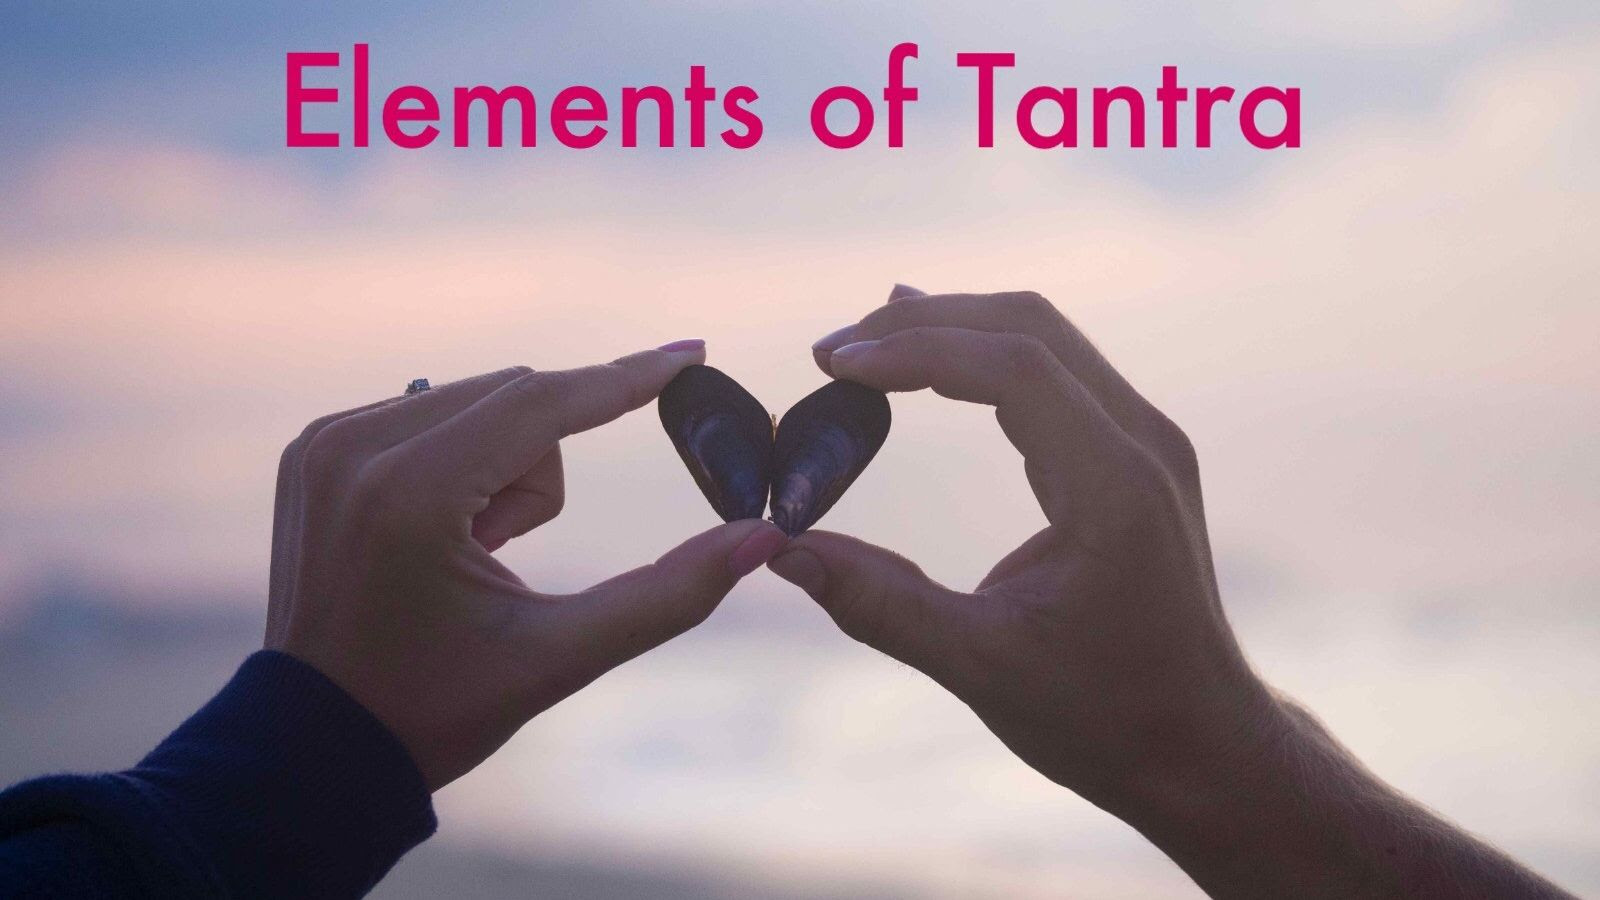 Elements of Tantra: Living Consciously, London, United Kingdom